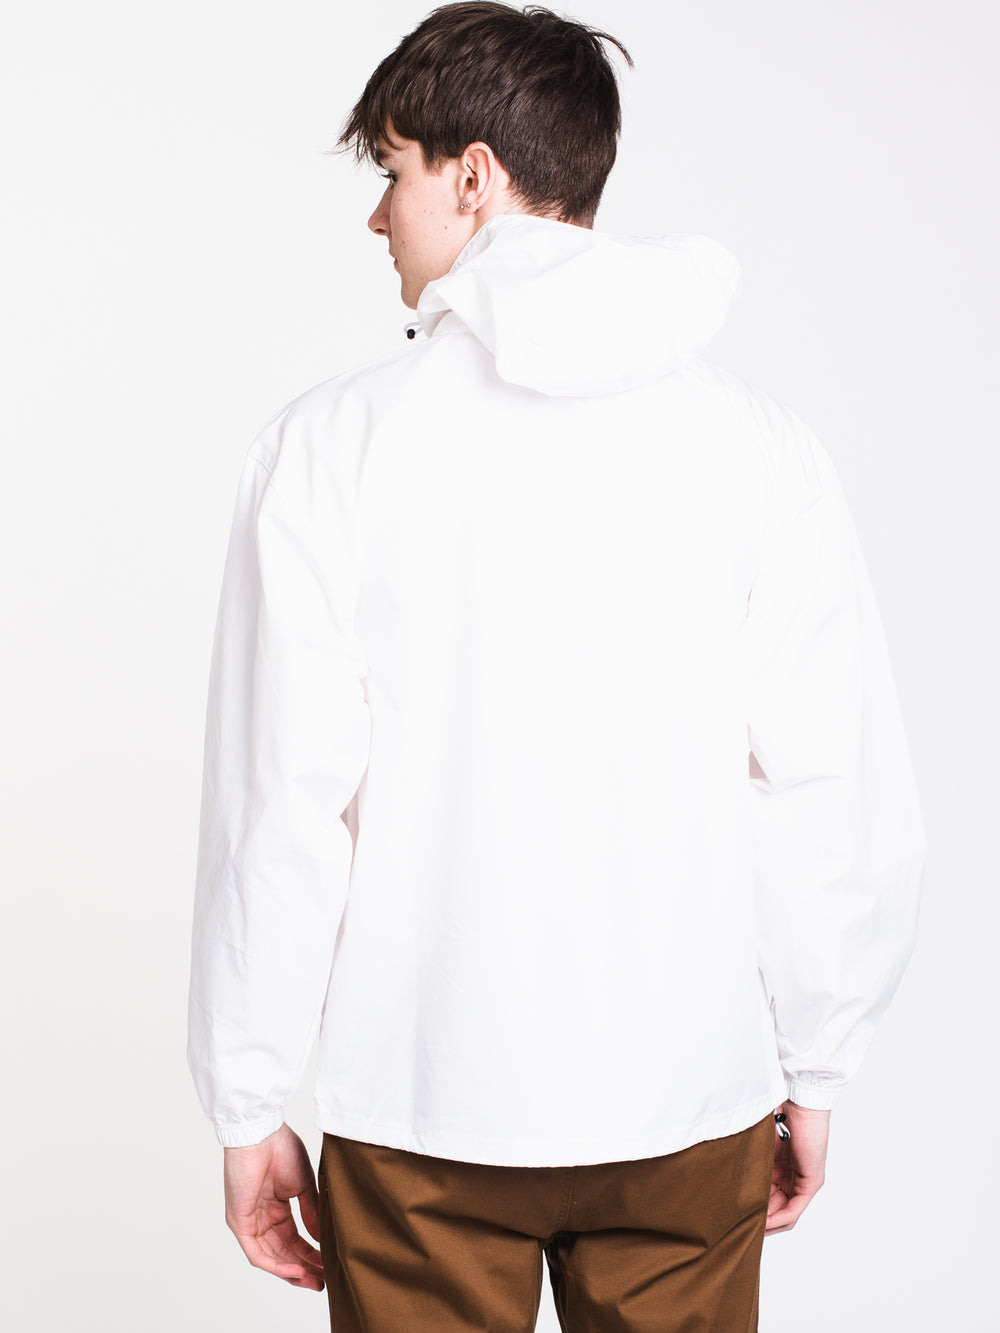 CHAMPION PACKABLE JACKET  - CLEARANCE